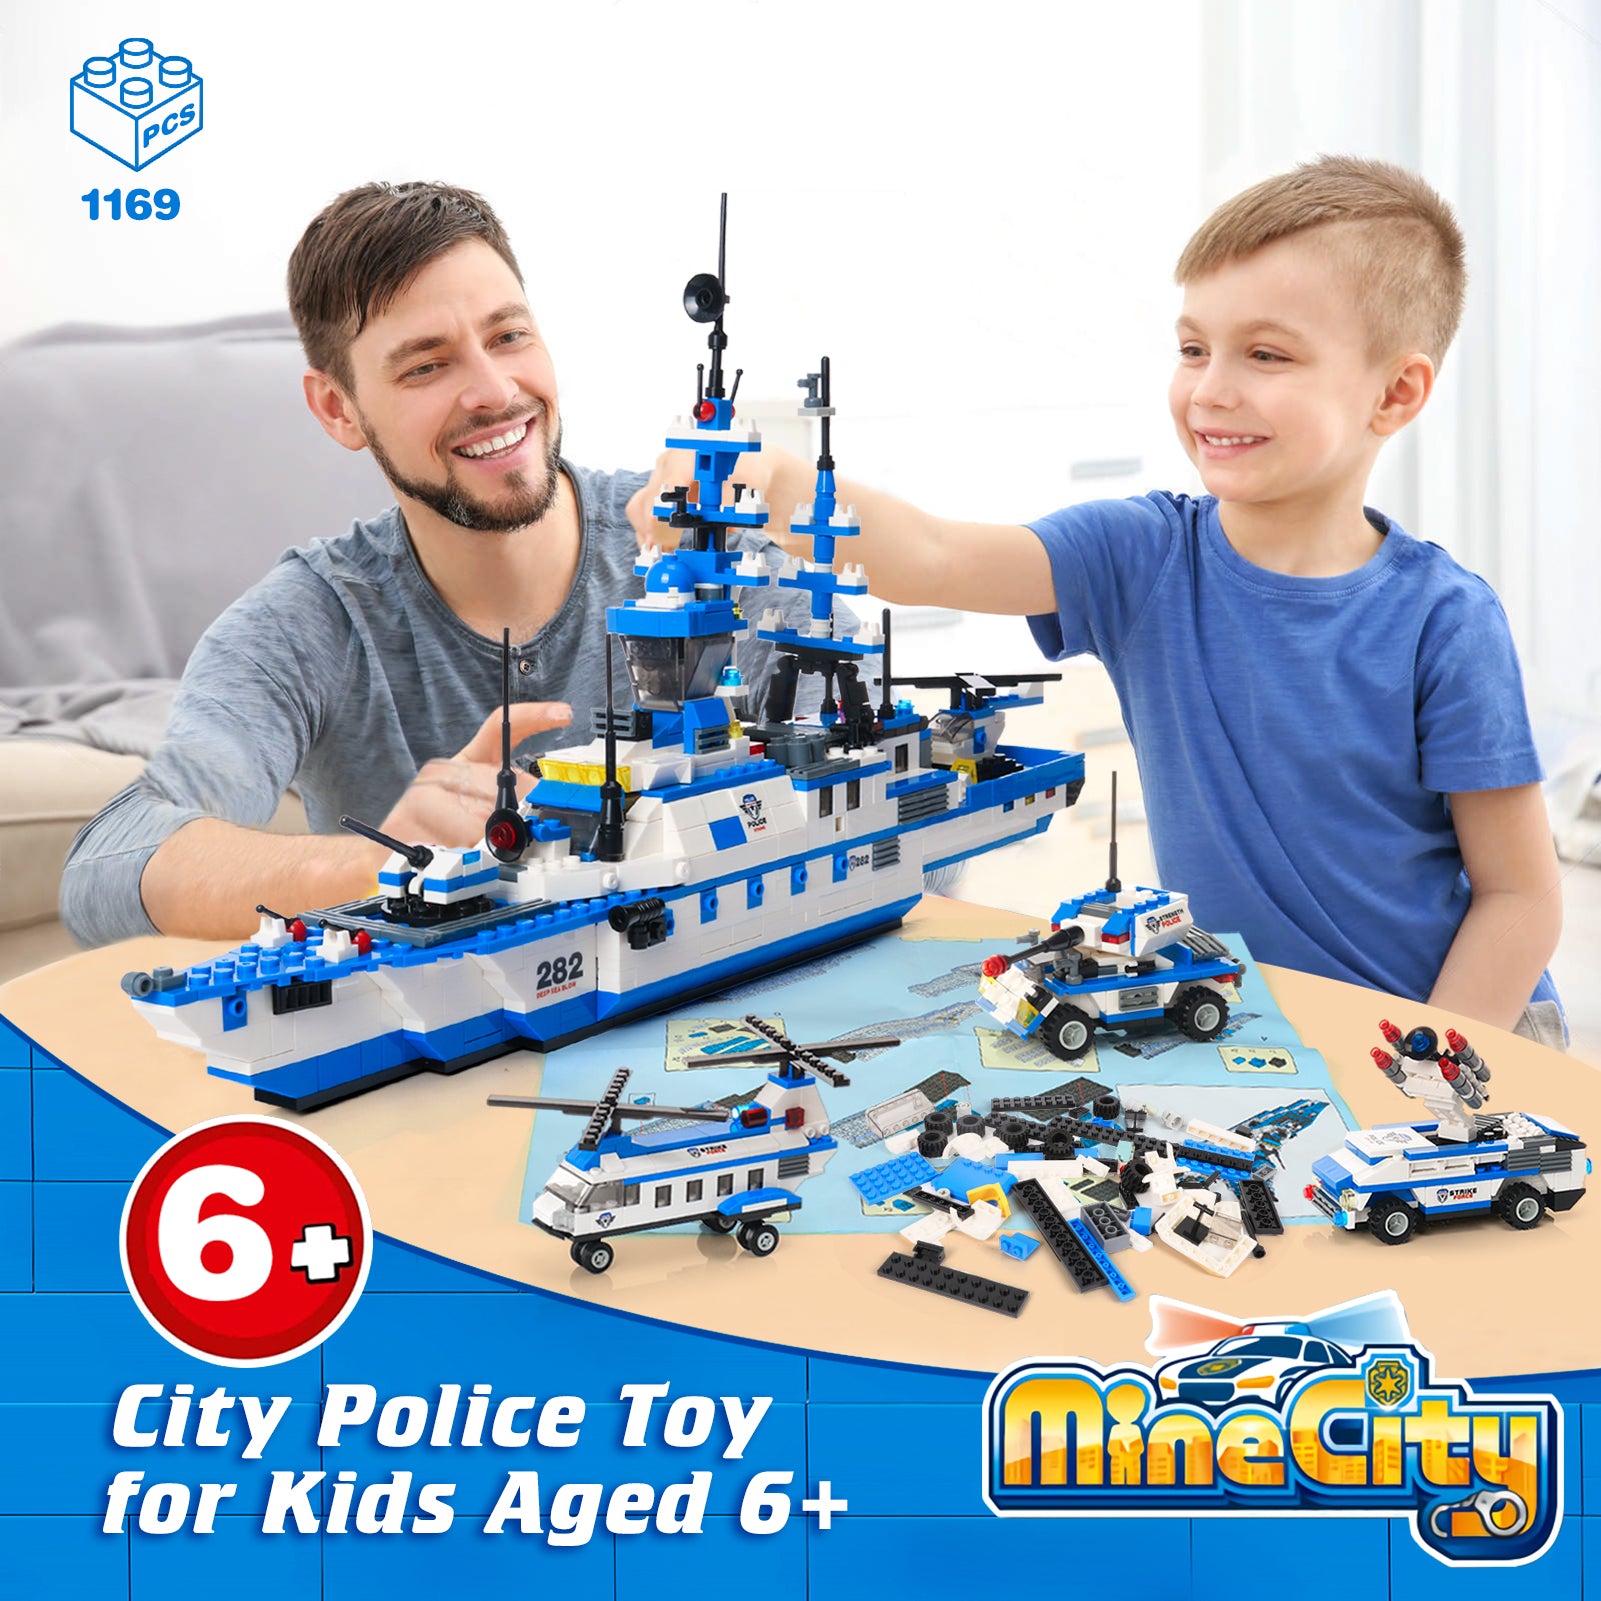 Ocean Military Battleship Building Block 6 IN 1 Military Battleship Building Toy Model Kit Best STEM Educational Toy Gift for Boys and Girls up 6 Ages With 1169 Pieces